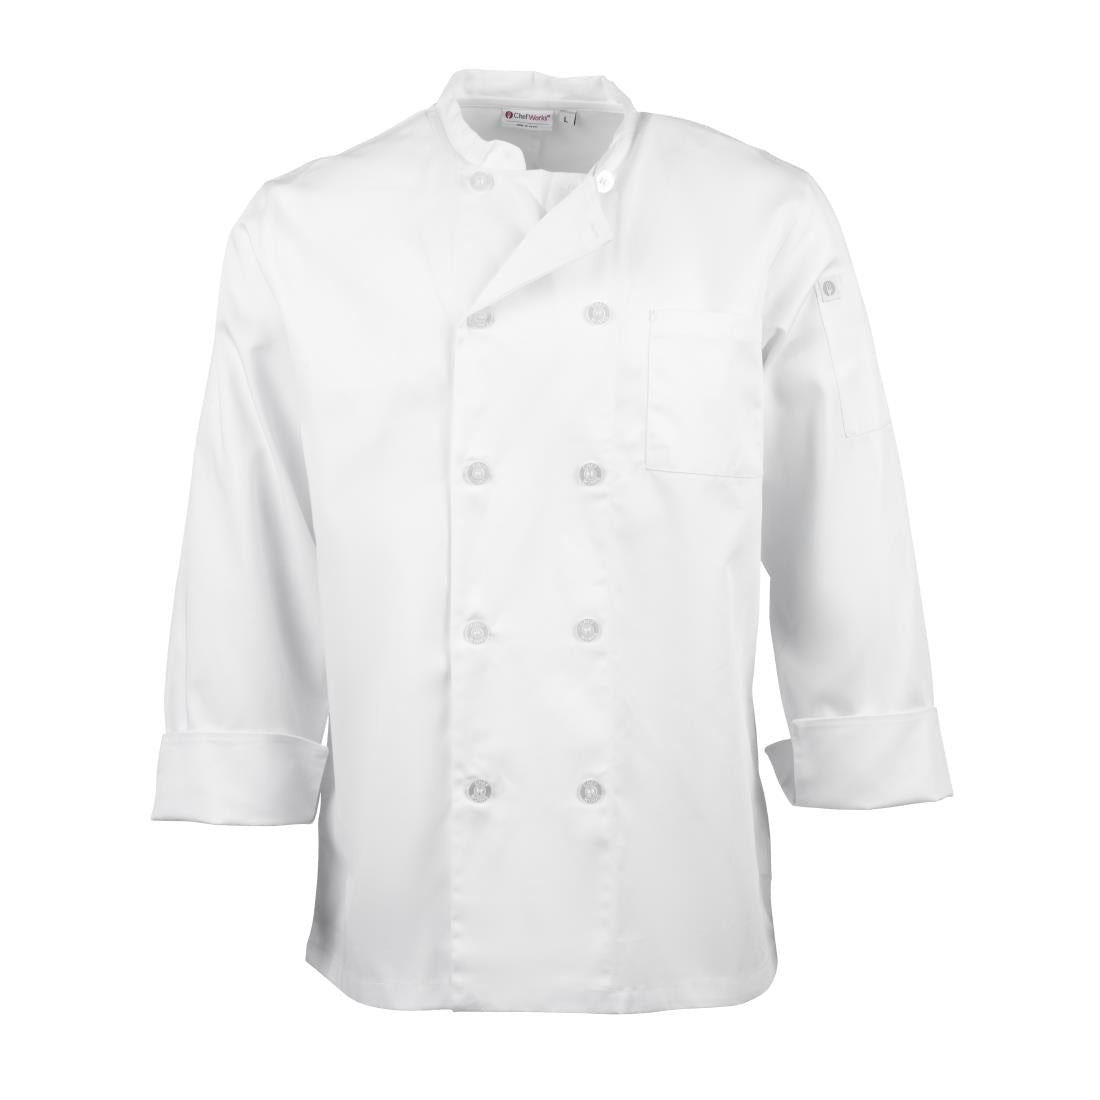 A371-6XL Chef Works Le Mans Chefs Jacket White 6XL JD Catering Equipment Solutions Ltd